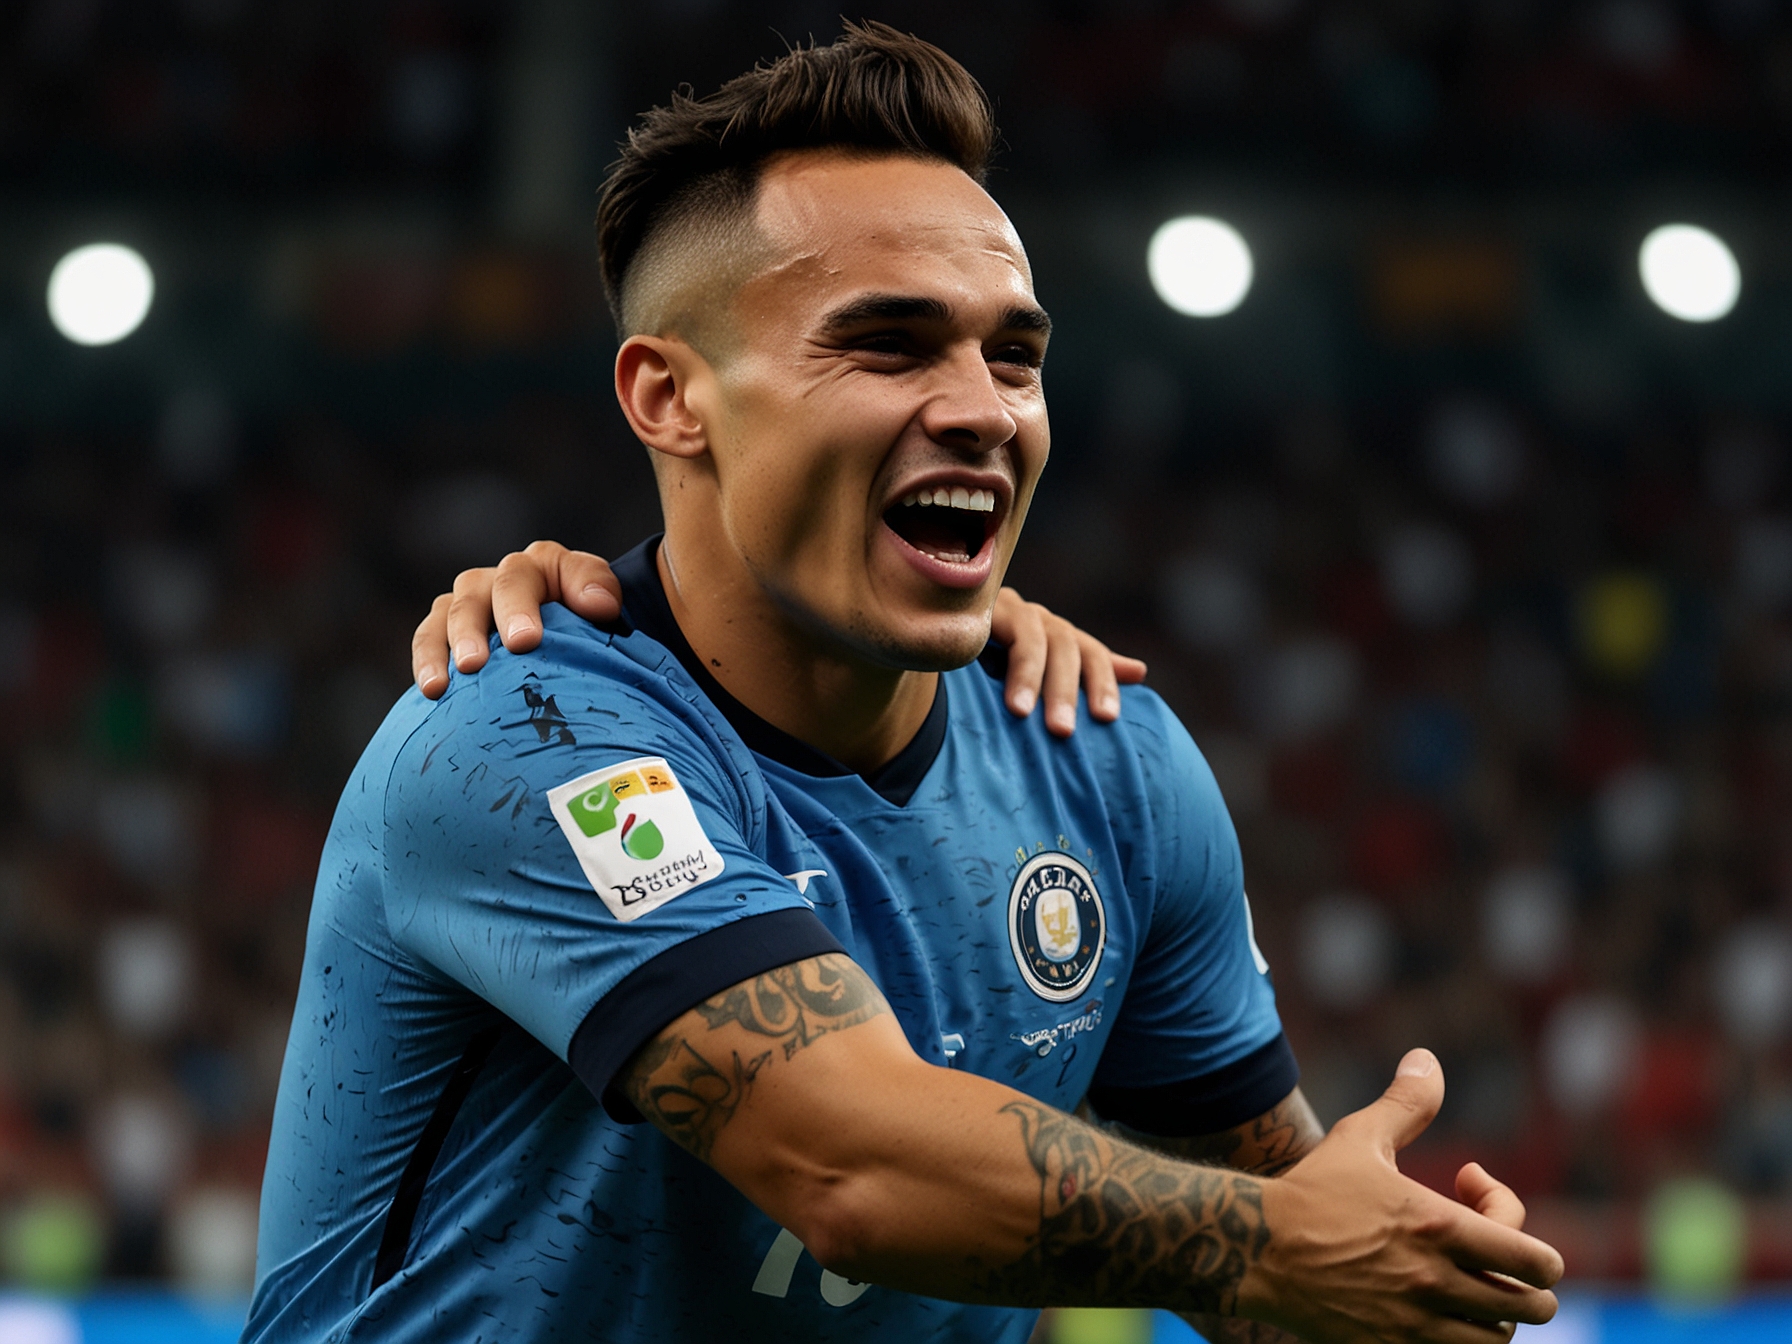 Lautaro Martinez celebrates scoring a goal against Peru, showcasing his technical finesse and emotional reaction by hugging his captain, highlighting his resurgence on the international stage.